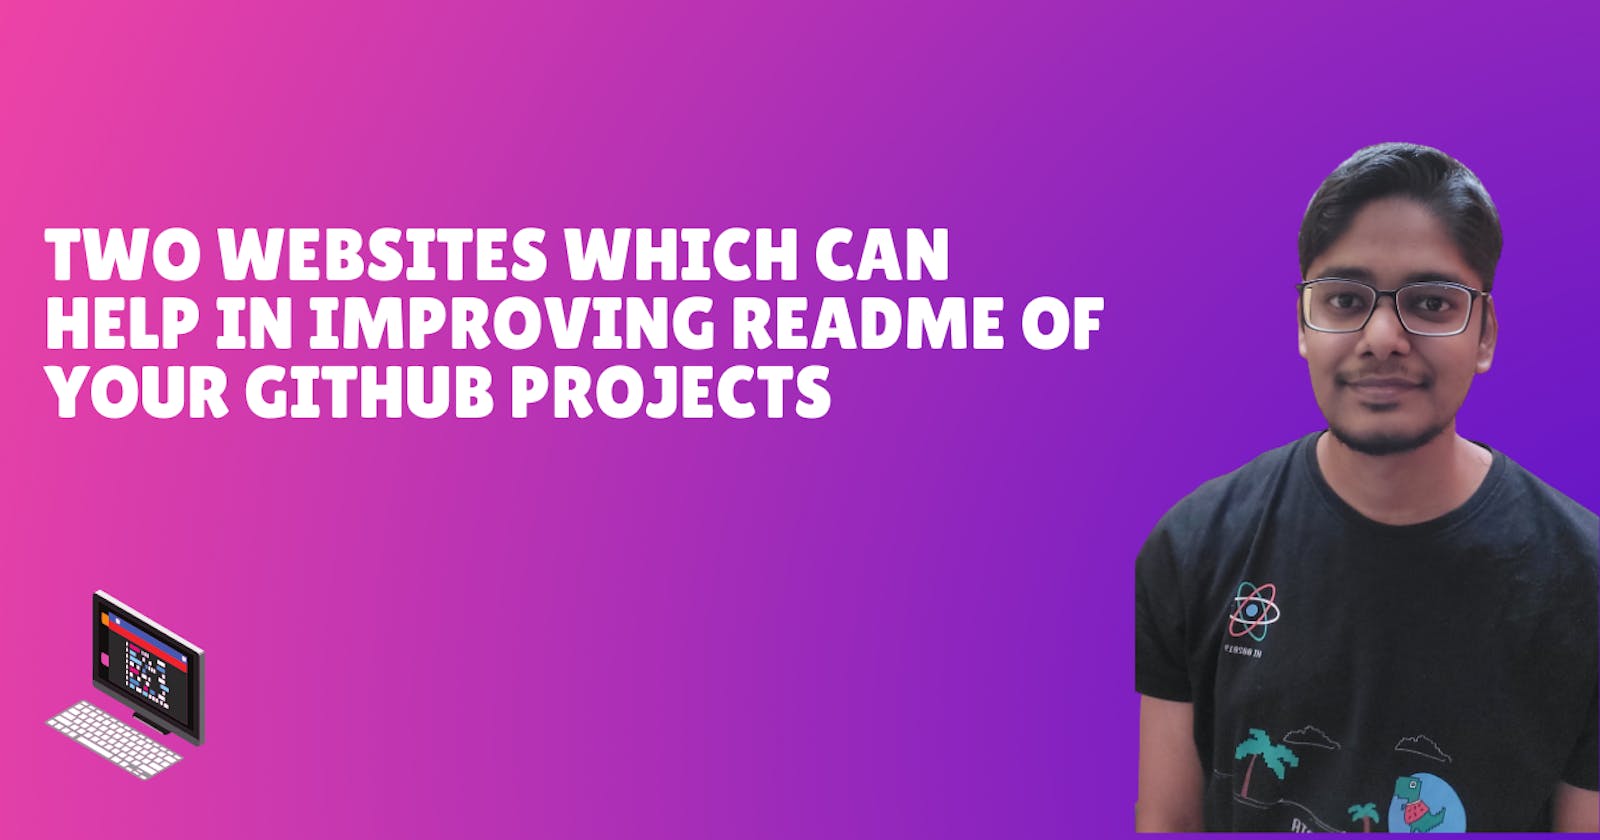 Two websites which can help in improving README of your Github projects